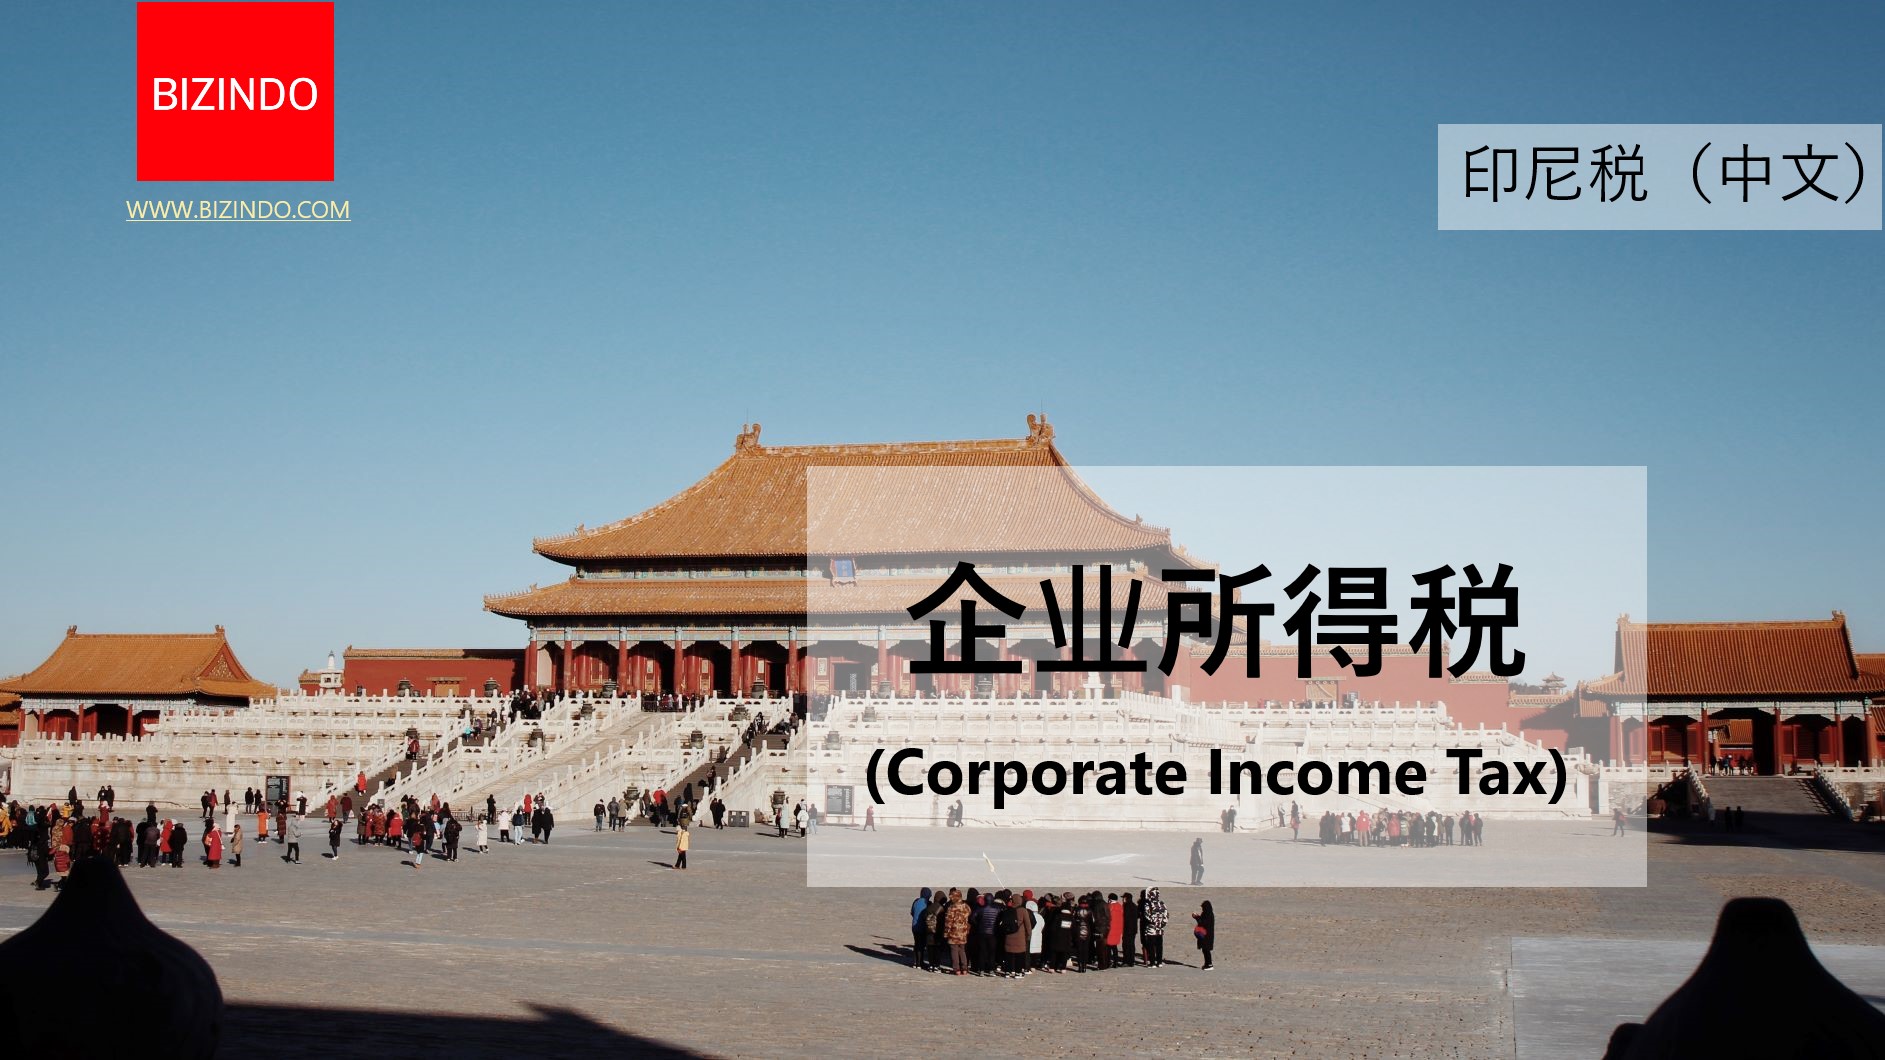 You are currently viewing Indonesian Corporate Income Tax (in Chinese) 印尼企业所得税（中文）